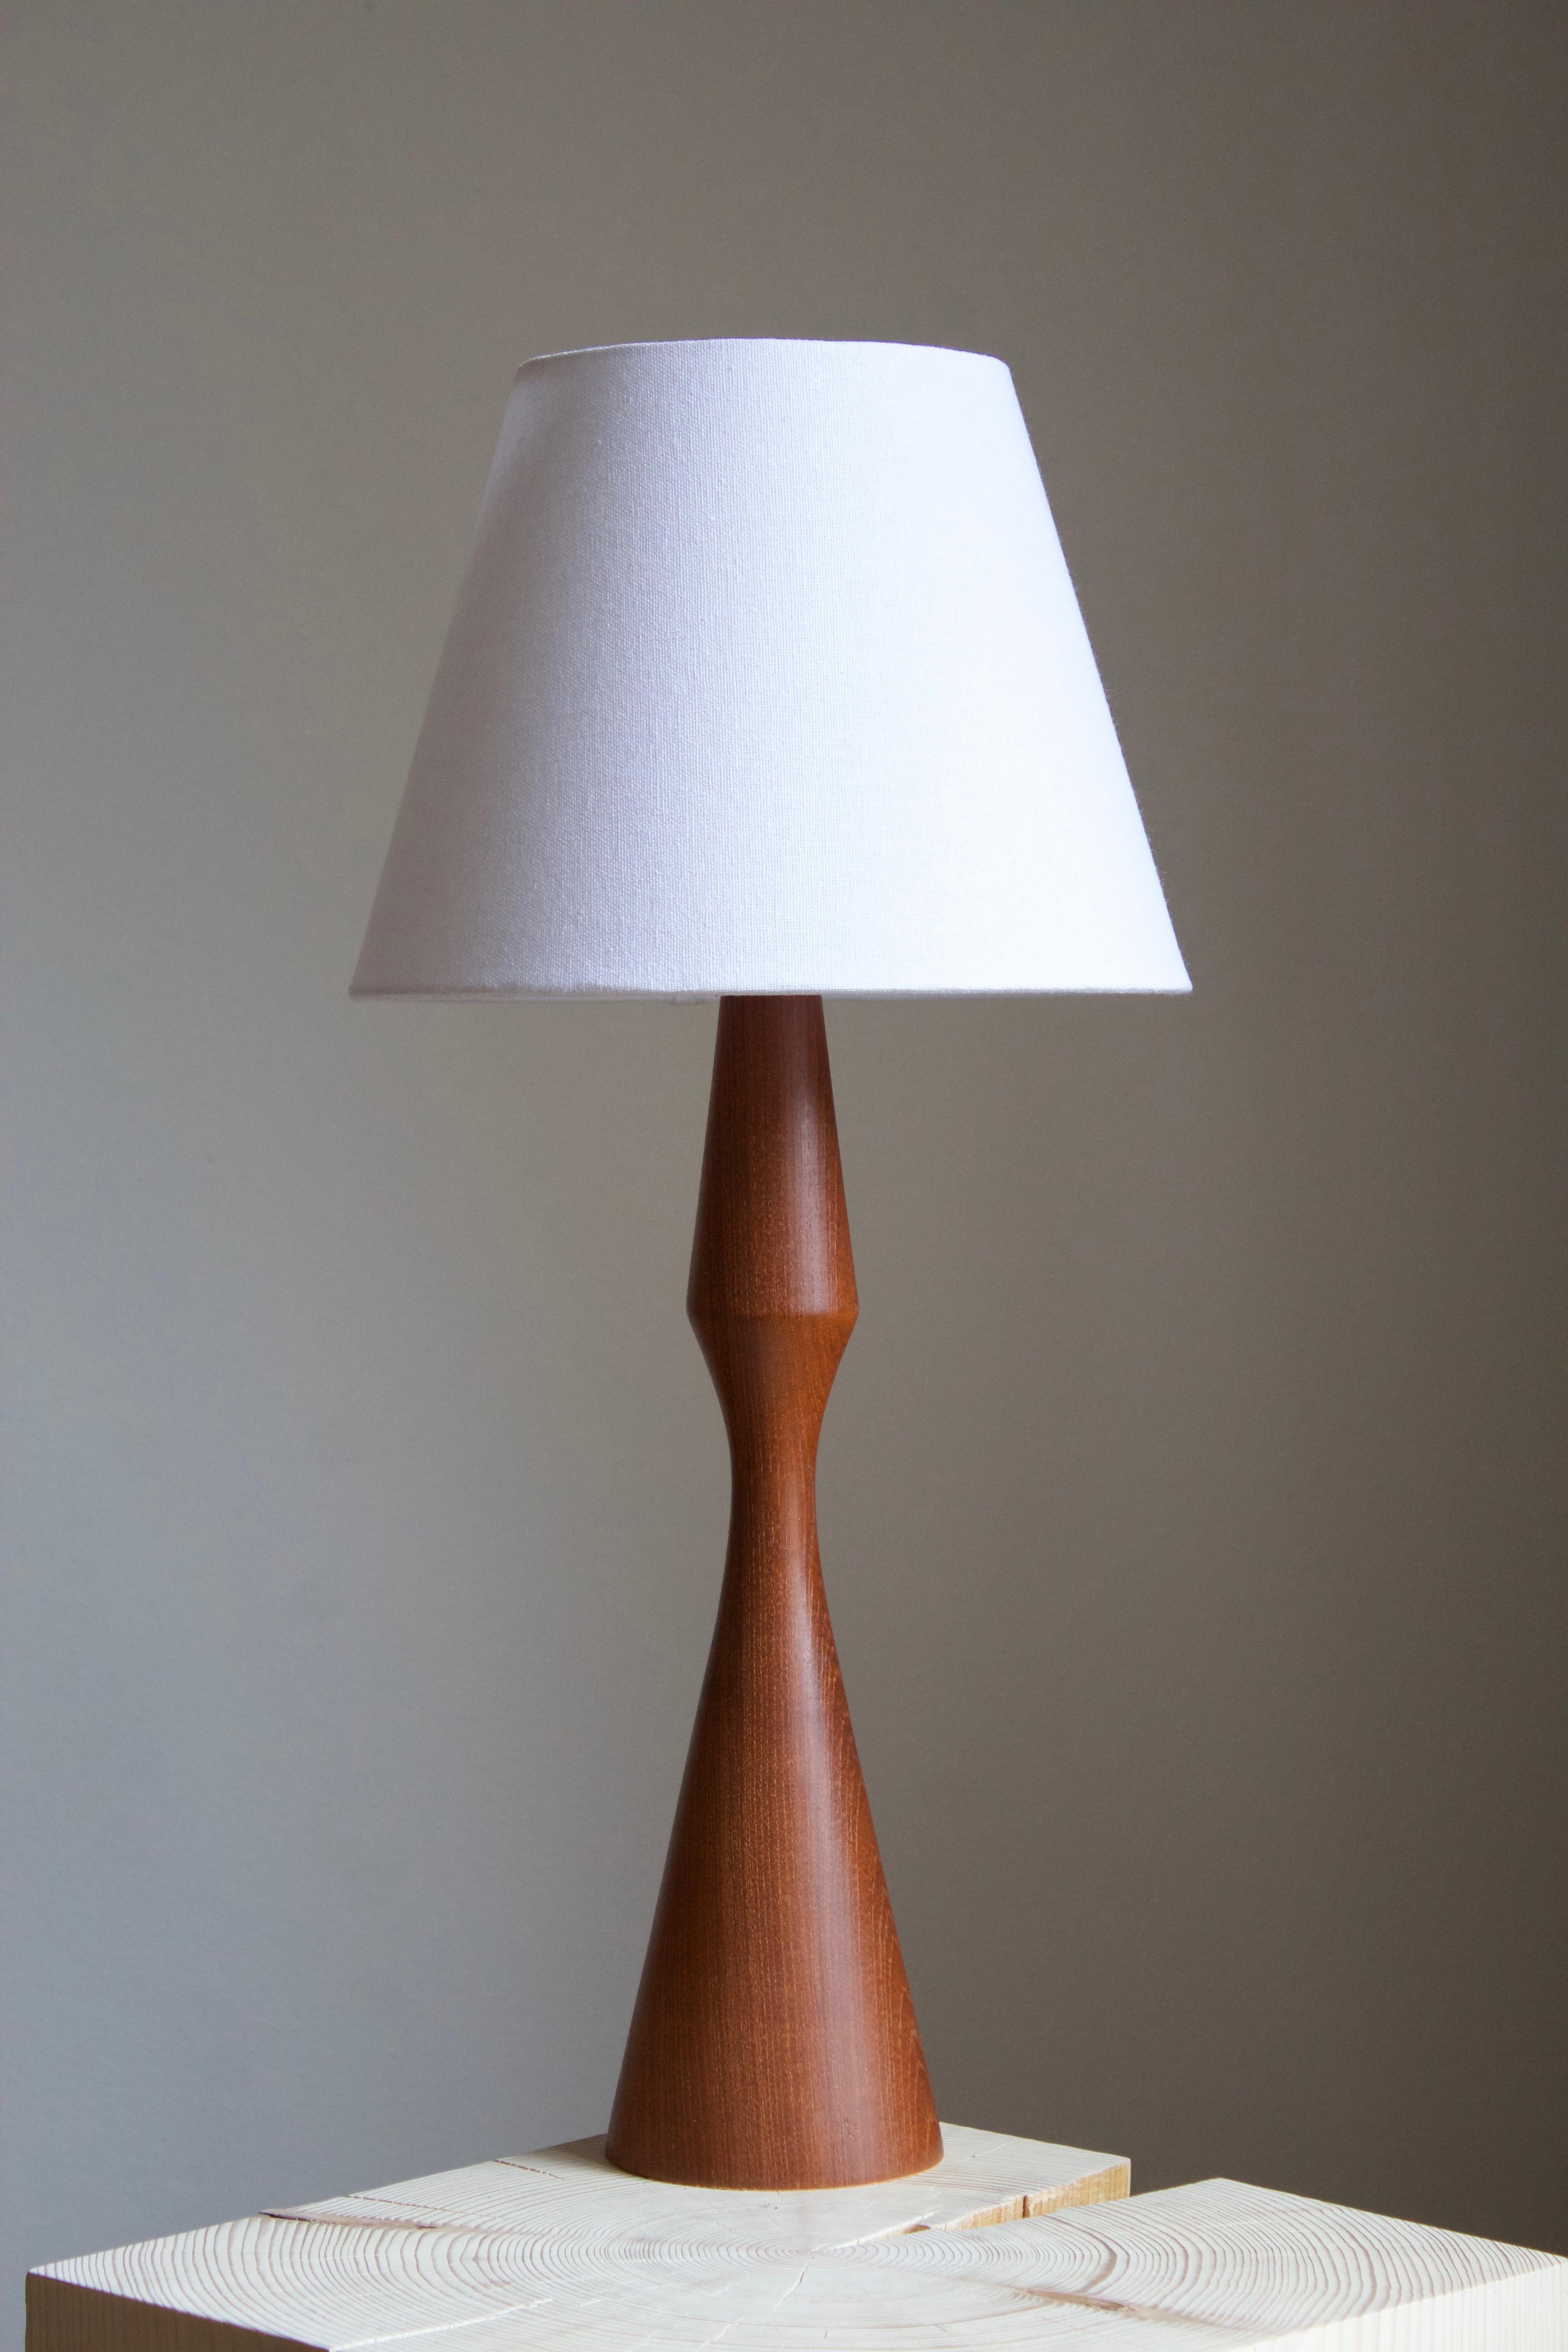 A very large organic table lamp. In solid turned teak. By unknown Swedish designer and producer, 1950s-1960s.

Stated dimensions exclude lampshade, height includes socket. Sold without lampshade.